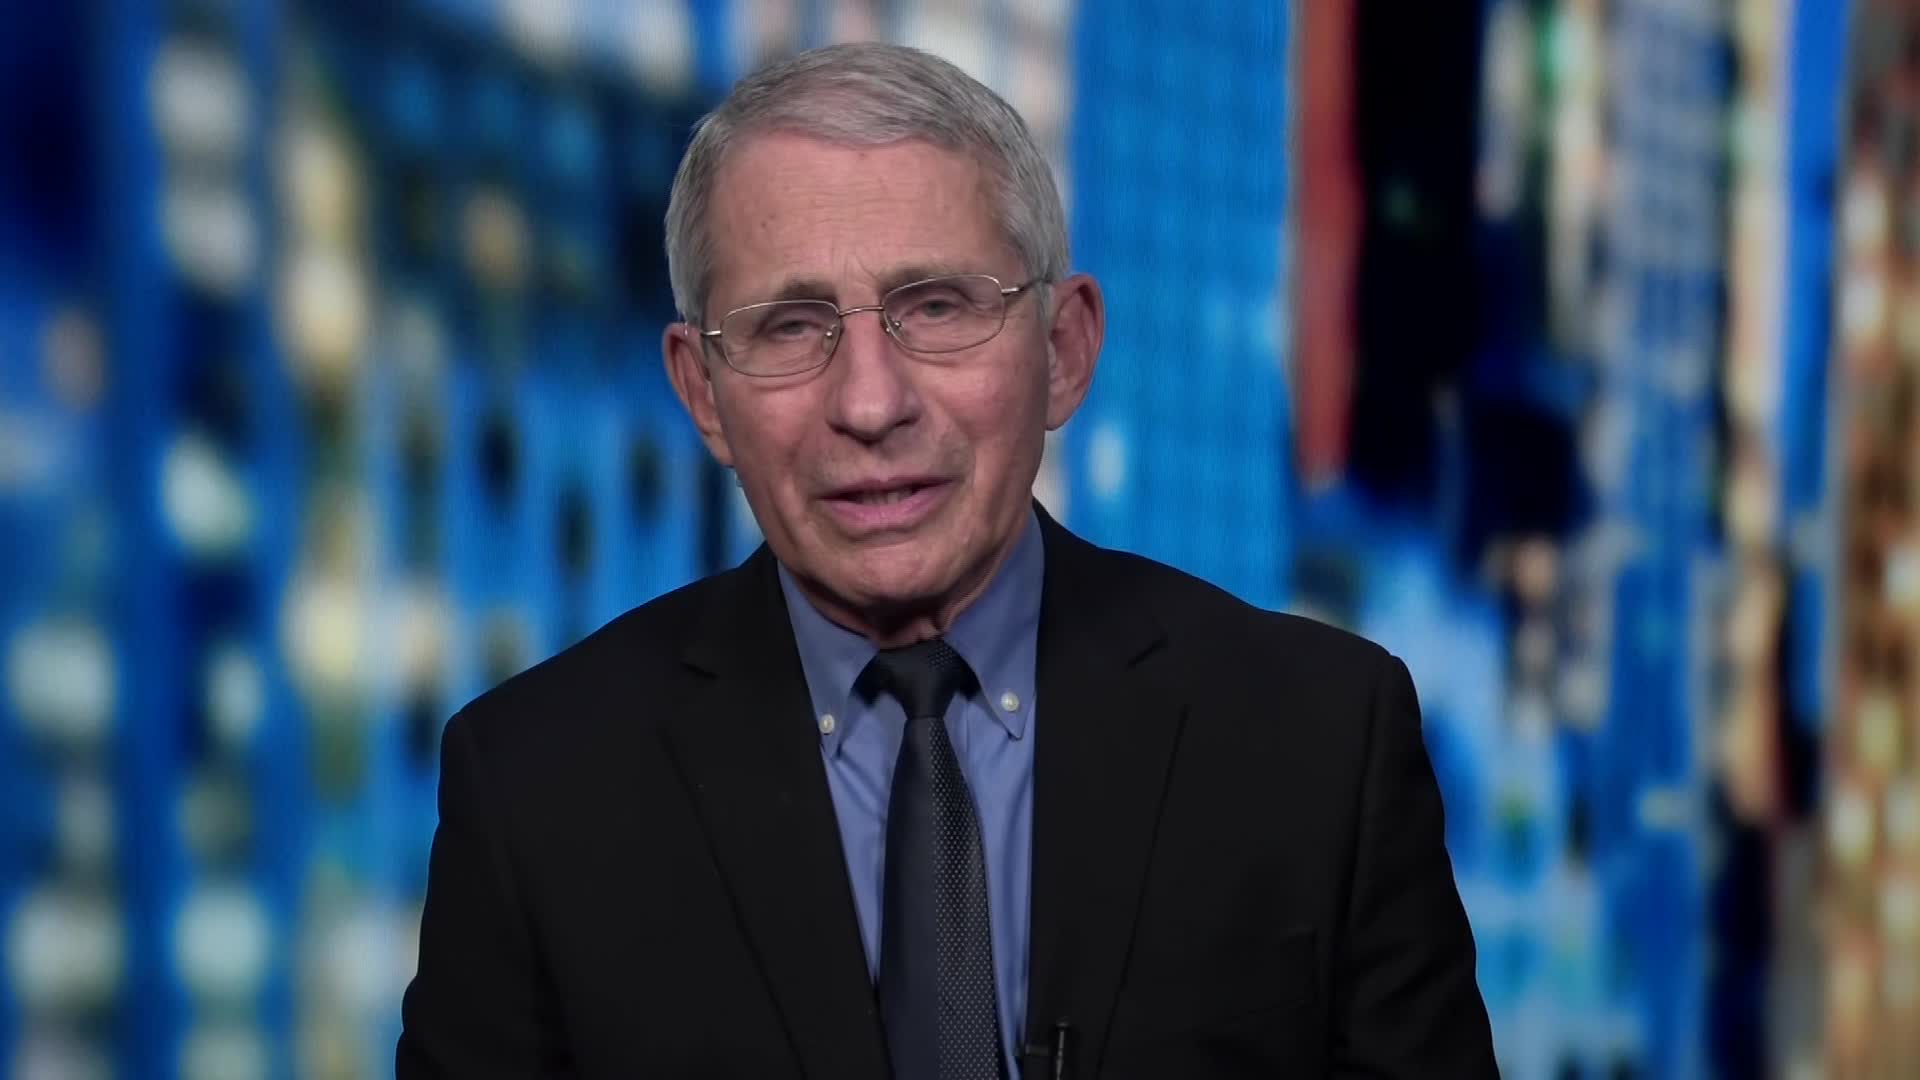 Dr. Anthony Fauci.